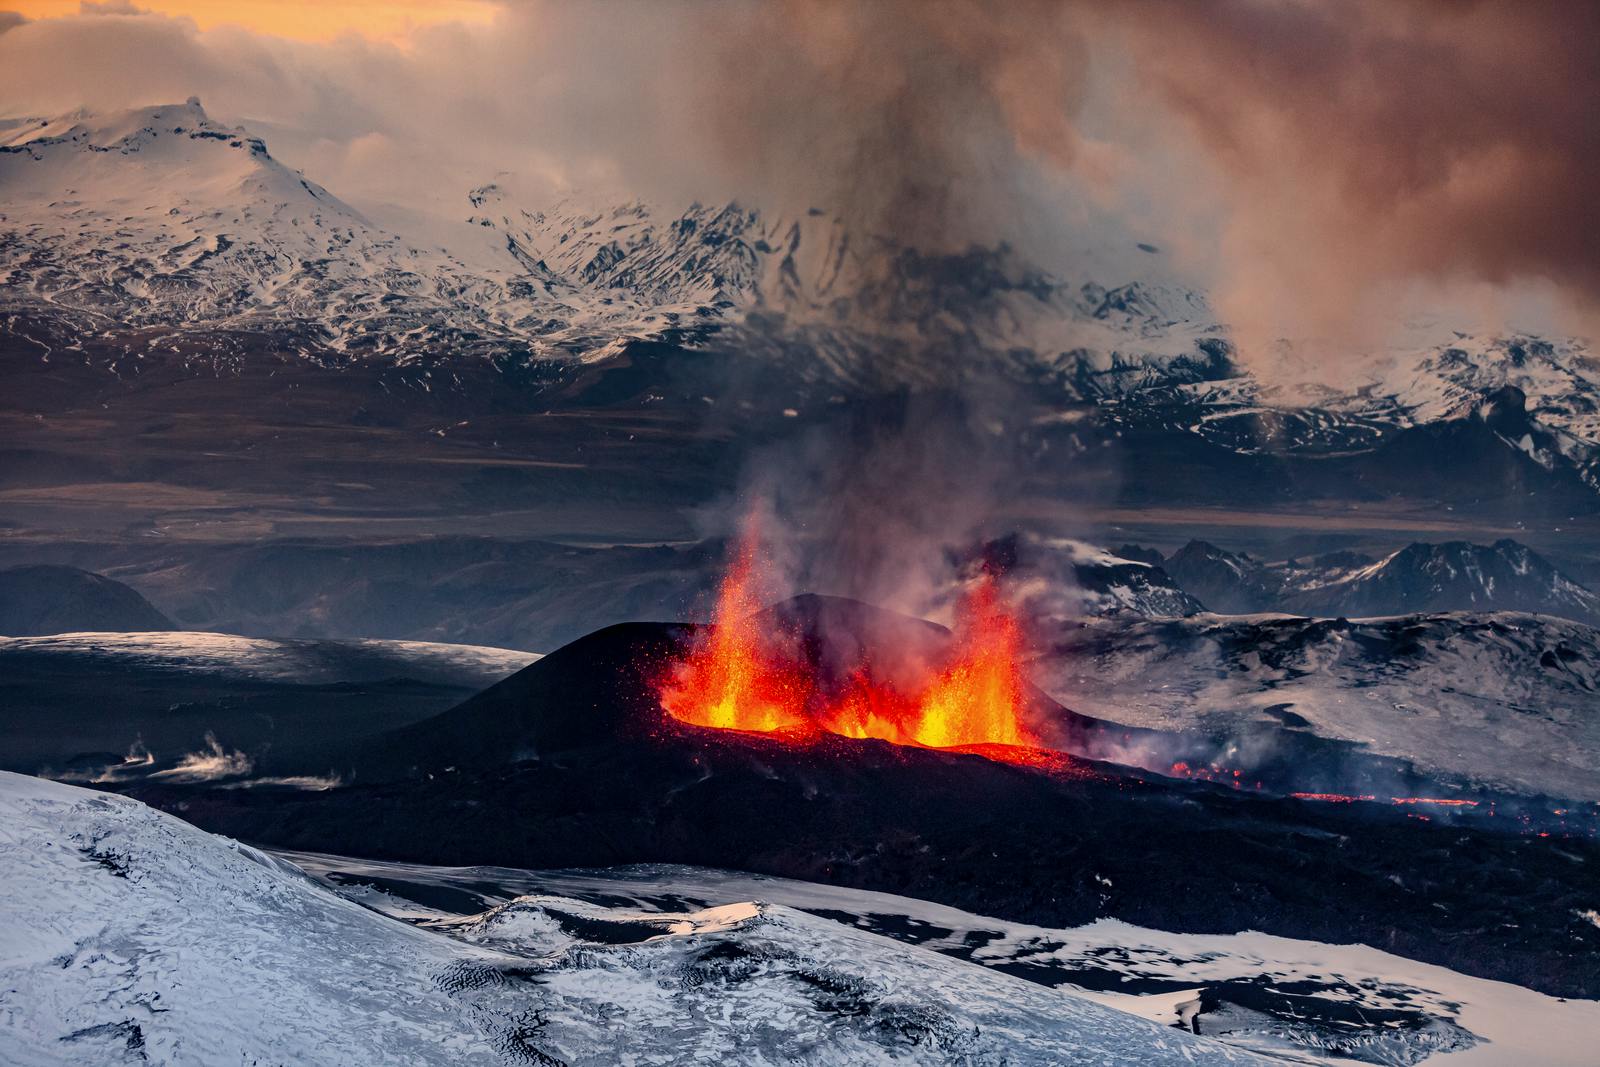 Fire fountains from two erupting craters, enveloped by snowy mountains